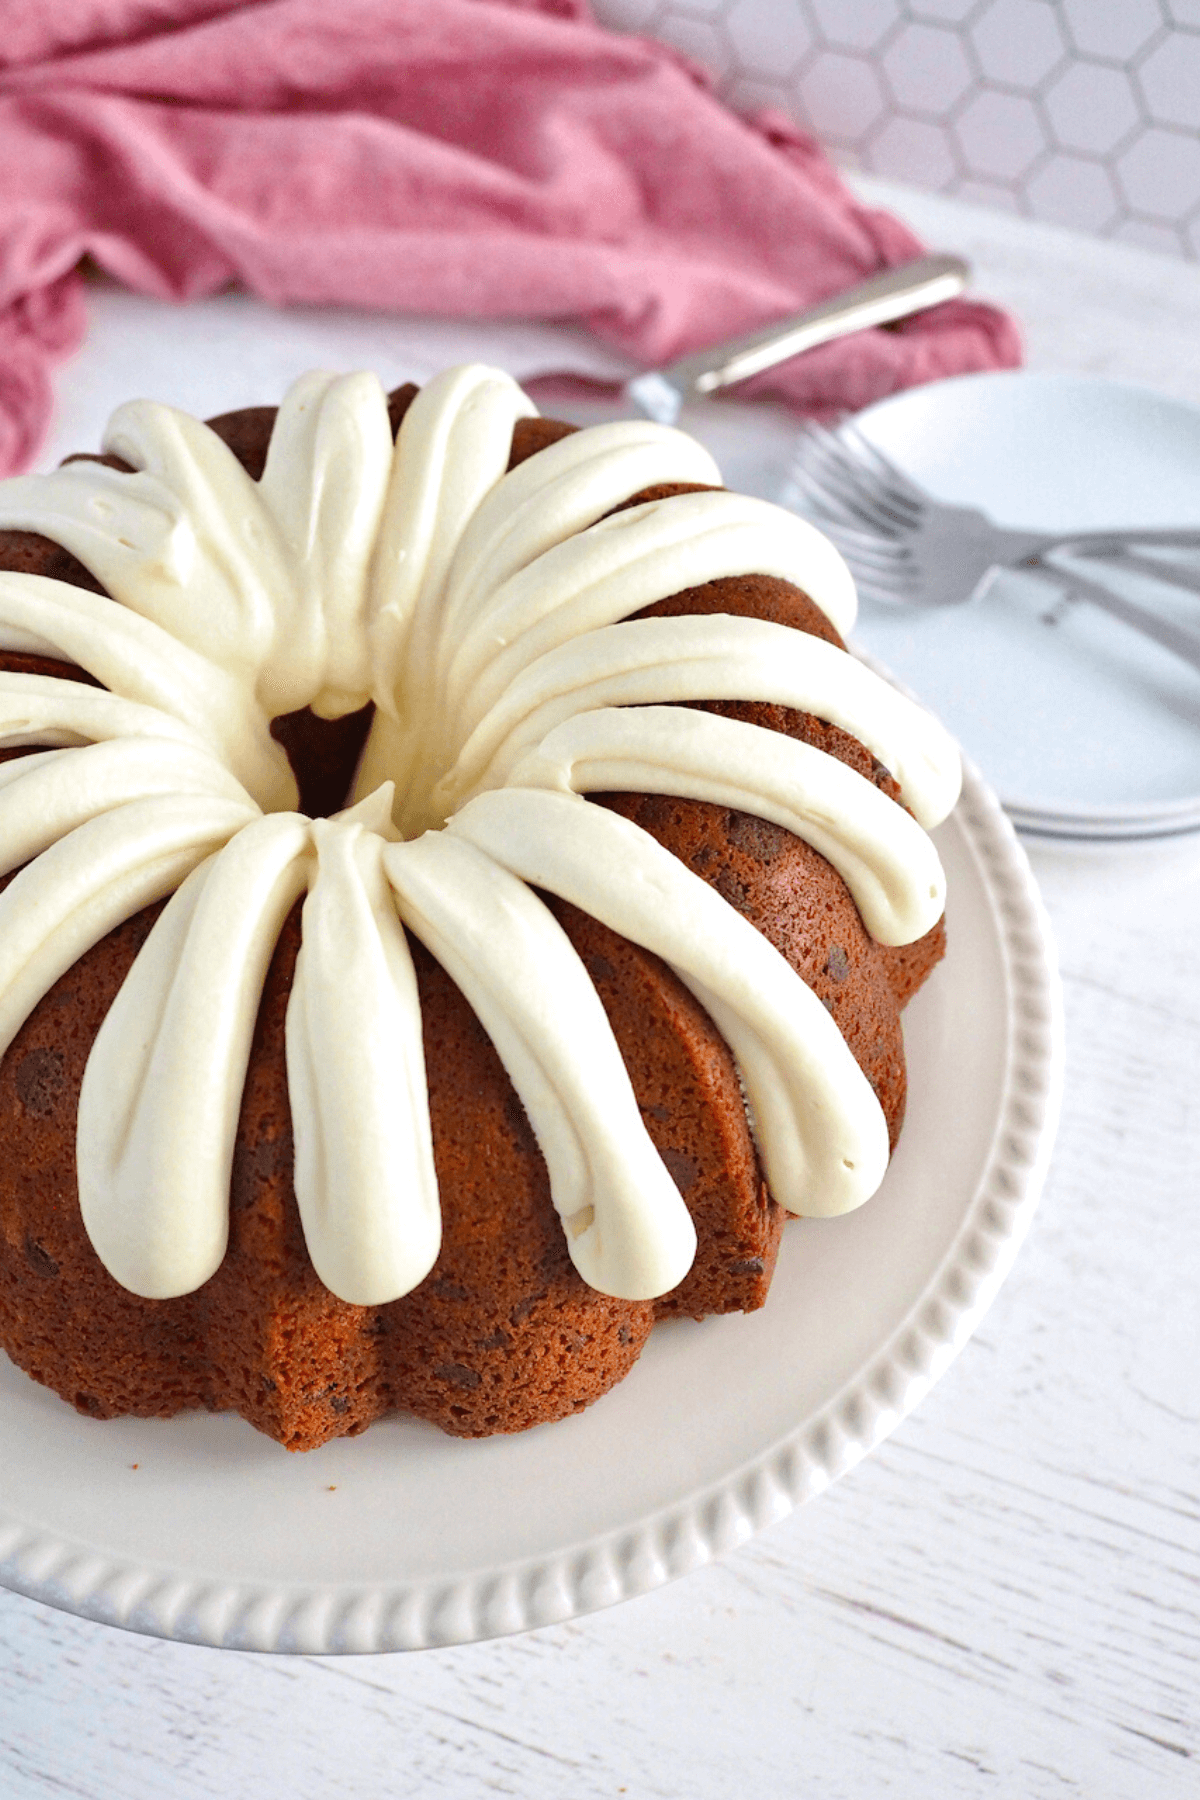 Frosted red velvet bundt cake frosted with thick rich fingers of cream cheese frosting, on a pretty cream cake plate with forks behind.